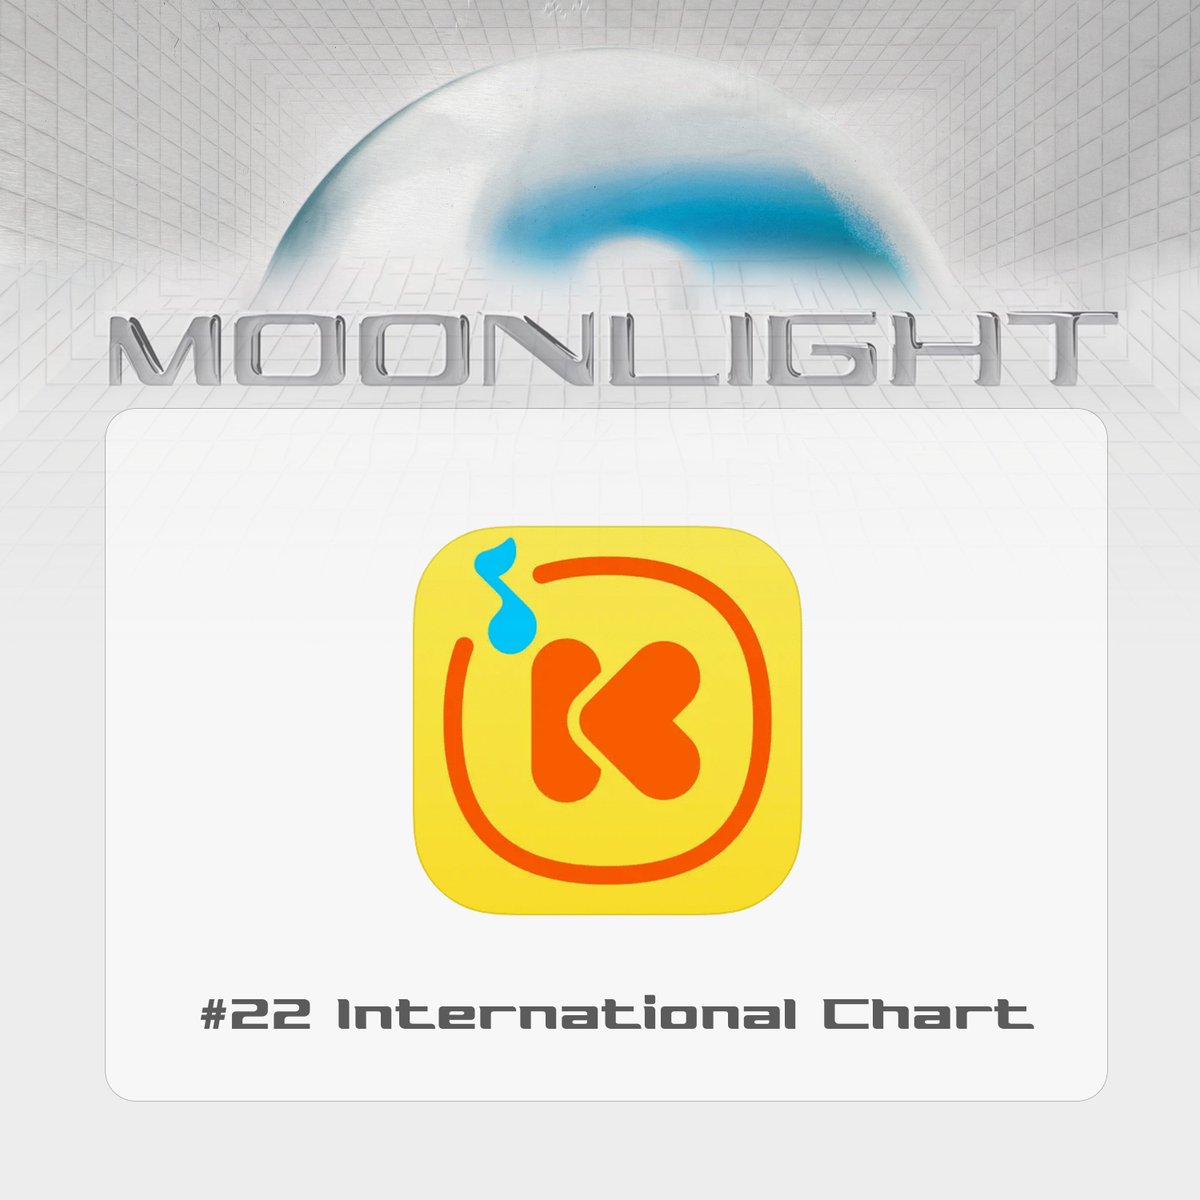 ⚪️ MOONLIGHT ON QQ MUSIC & KUWO MUSIC CHARTS 'MOONLIGHT' is shining even brighter as it climbs the charts in China! QQ Music and Kuwo Music are among the leading streaming platforms in the country. Stream 'MOONLIGHT' here: 🎧 orcd.co/inthemoonlight 🎬 youtube.com/watch?v=_WIGlf…